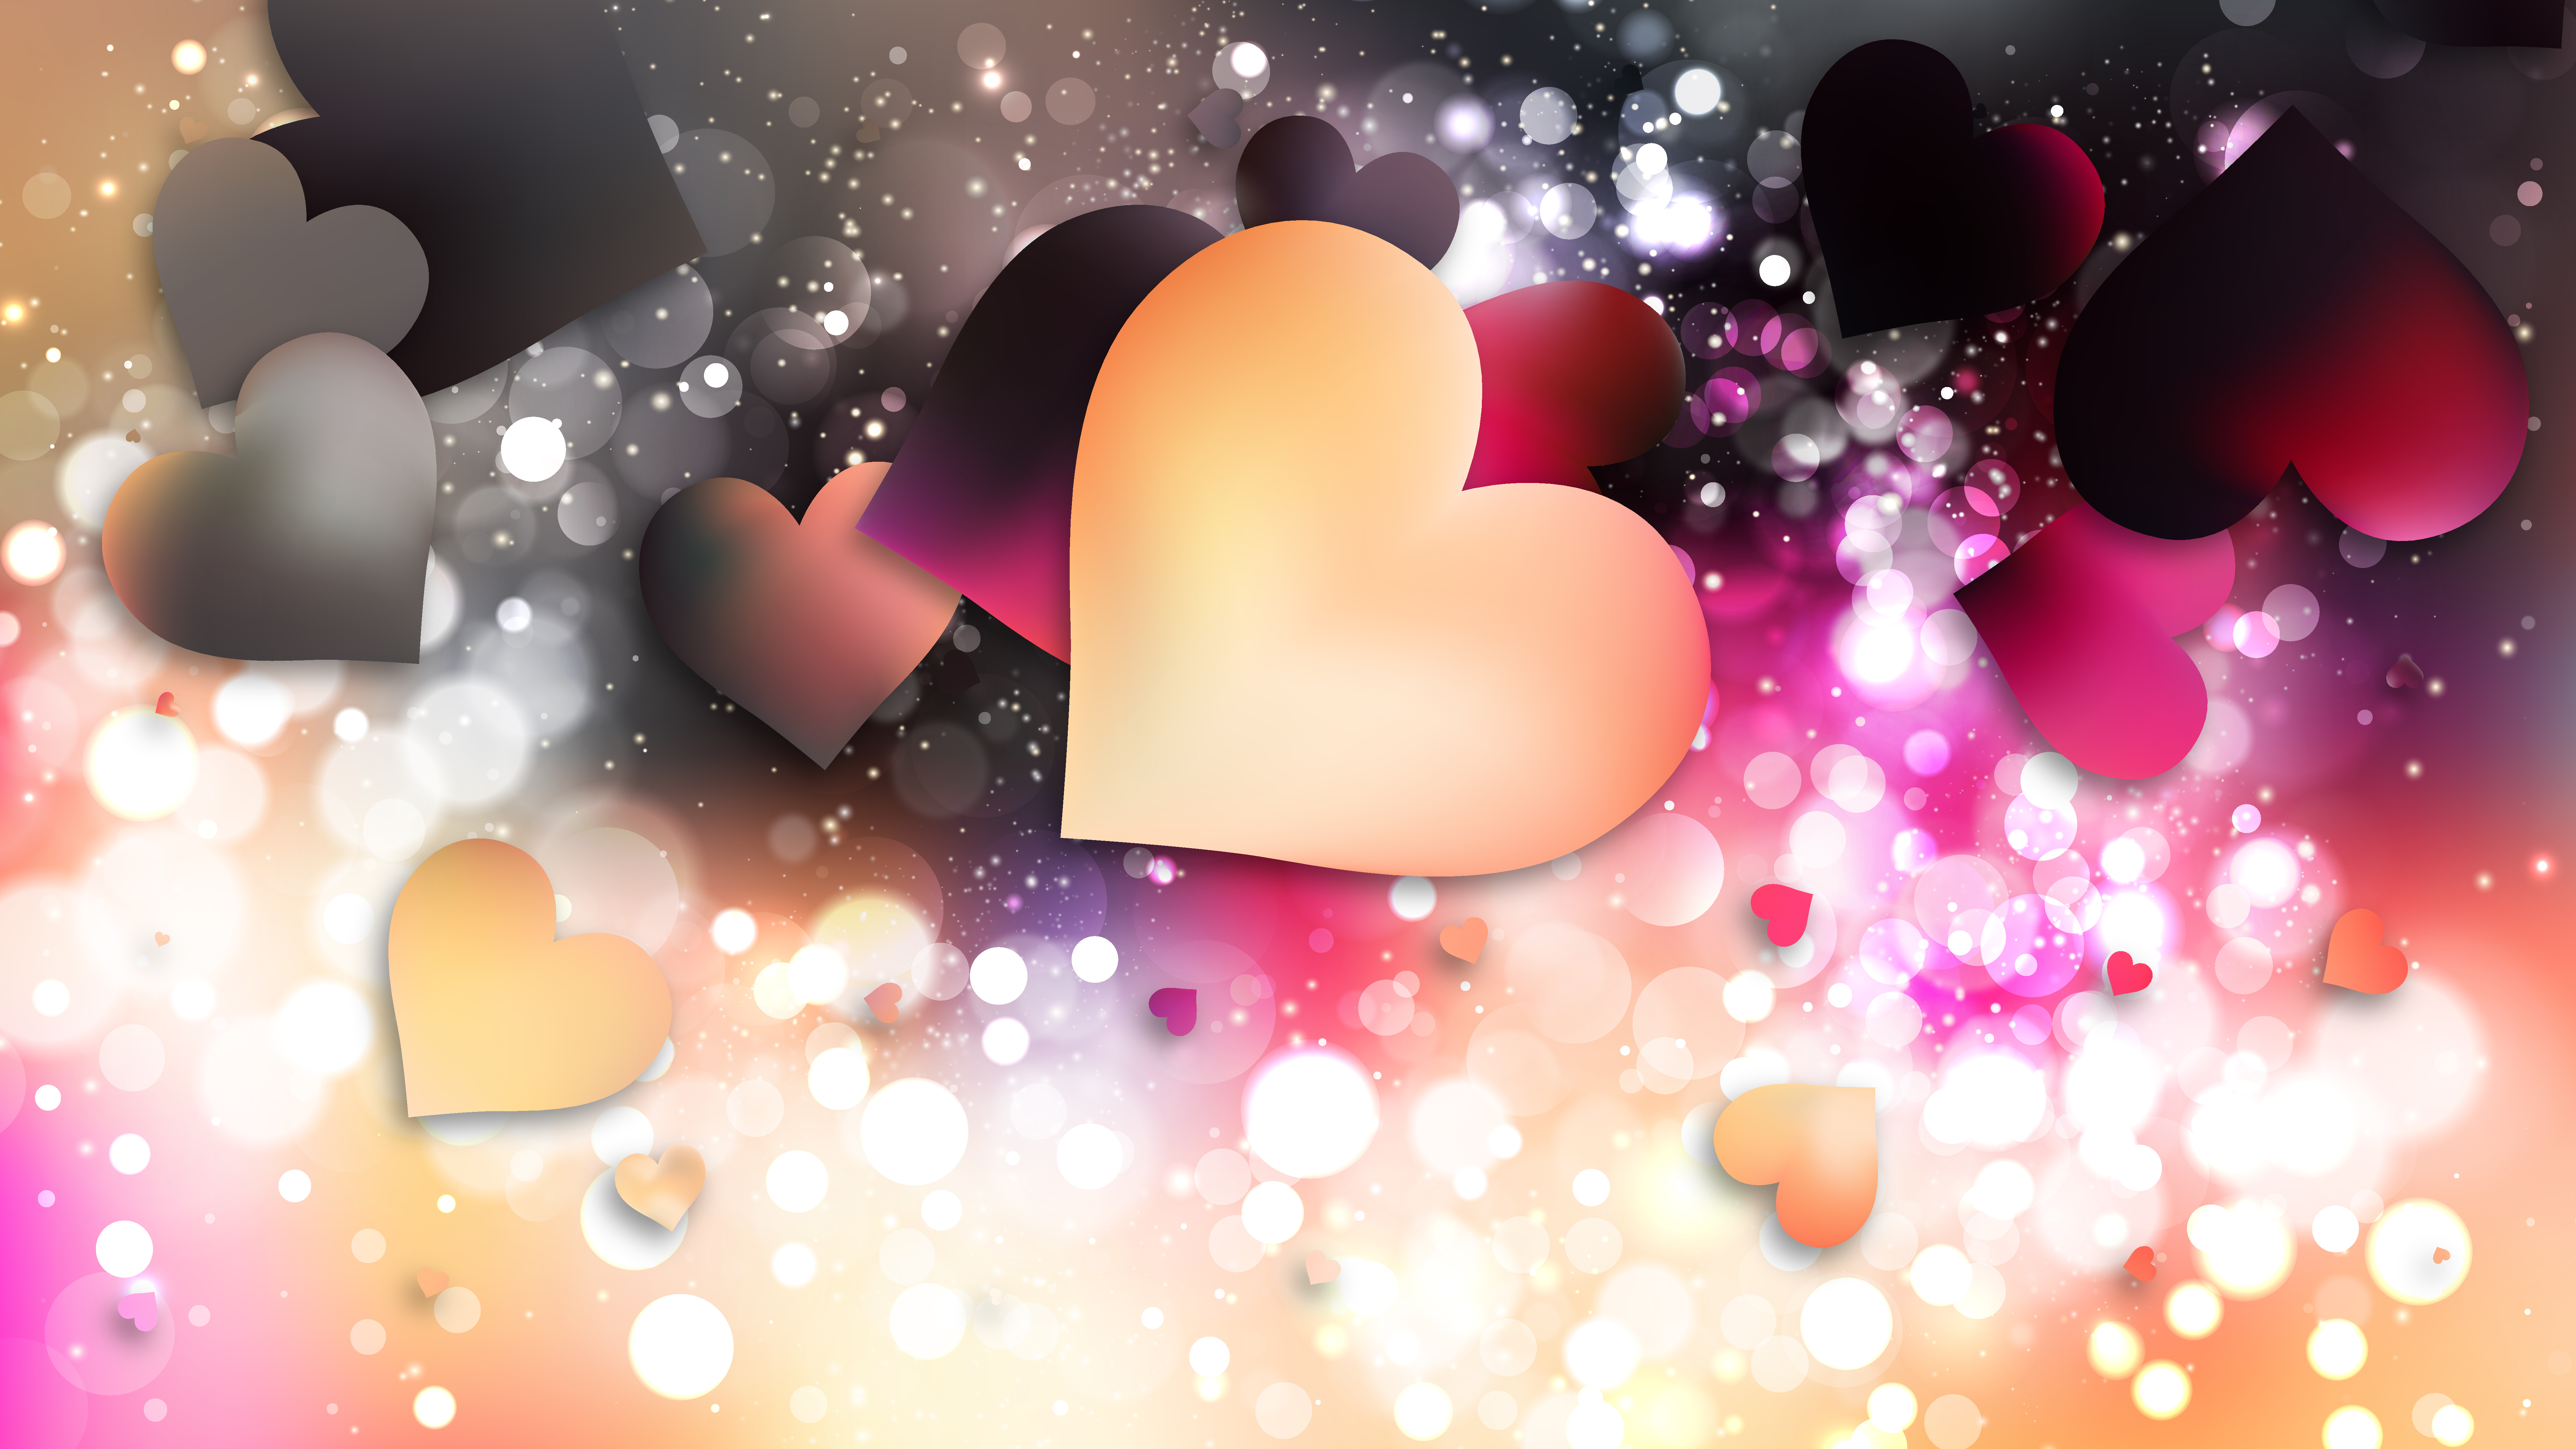 Free and customizable heart wallpaper templates